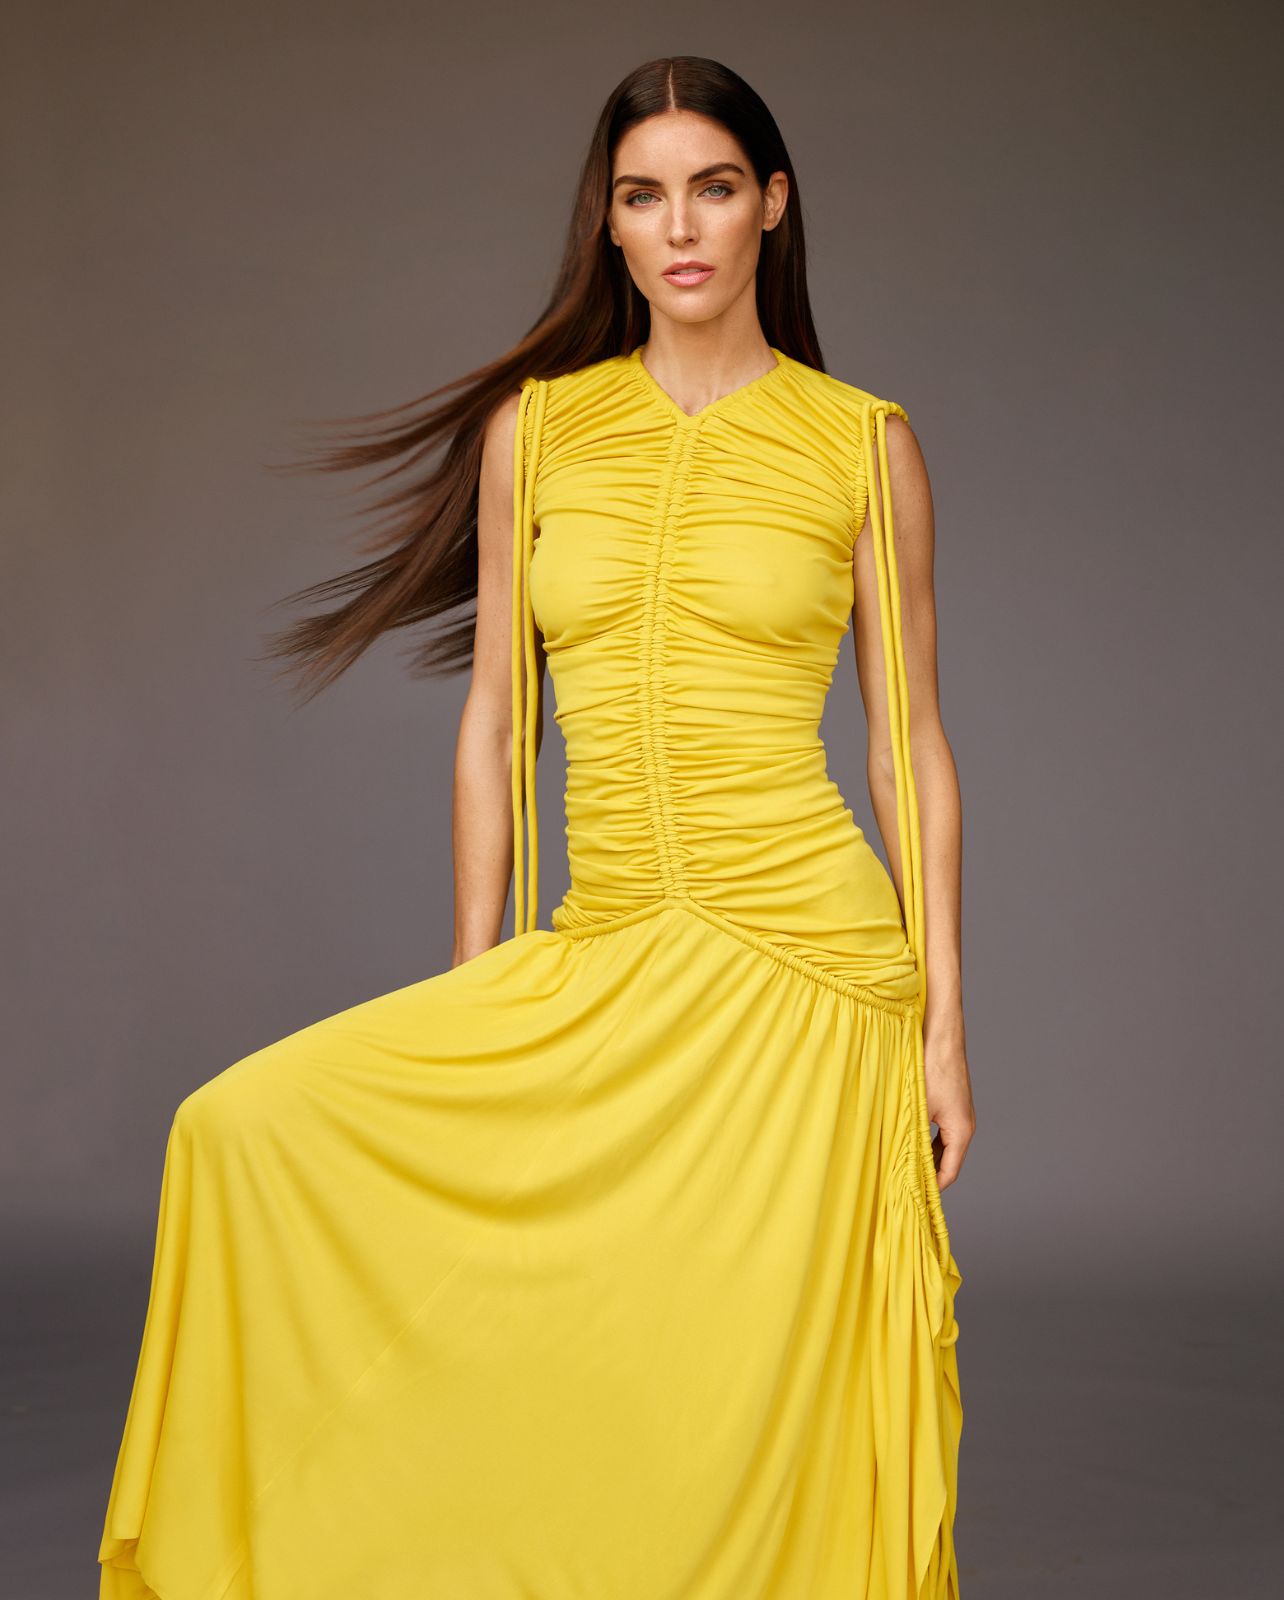 Model poses in a ruched yellow maxi dress